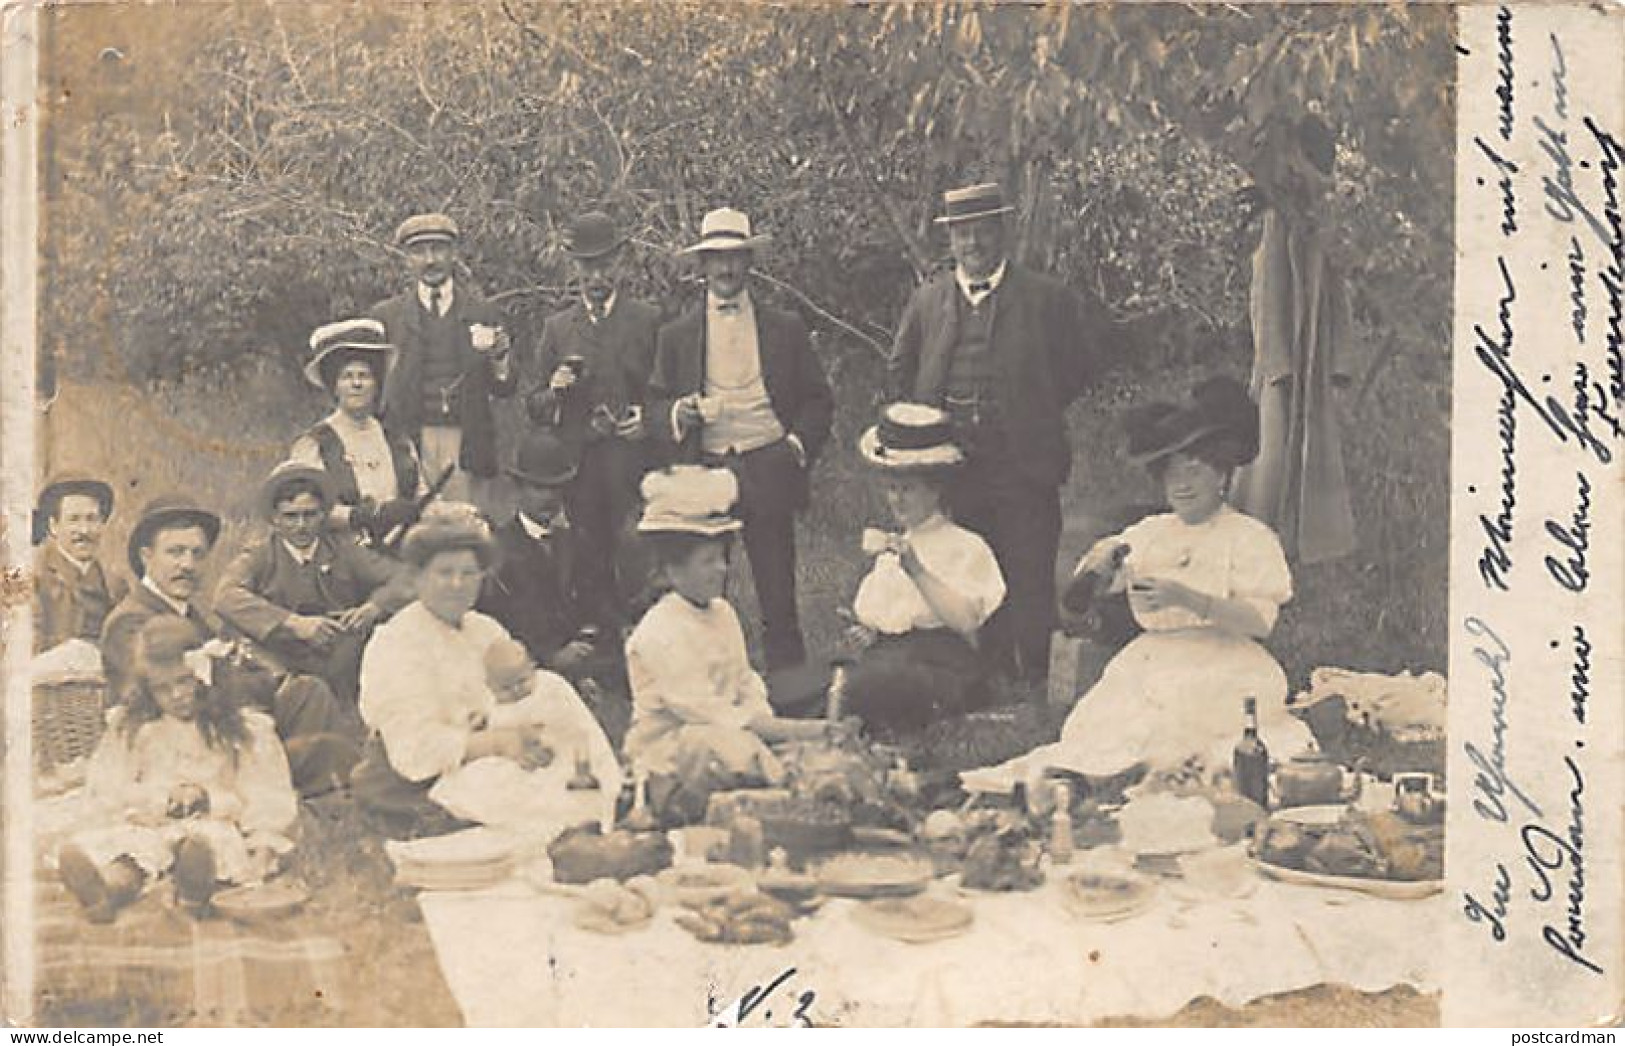 New Zealand - CHRISTCHURCH - Pic Nic Party - REAL PHOTO - Publ. Unknown  - Nouvelle-Zélande